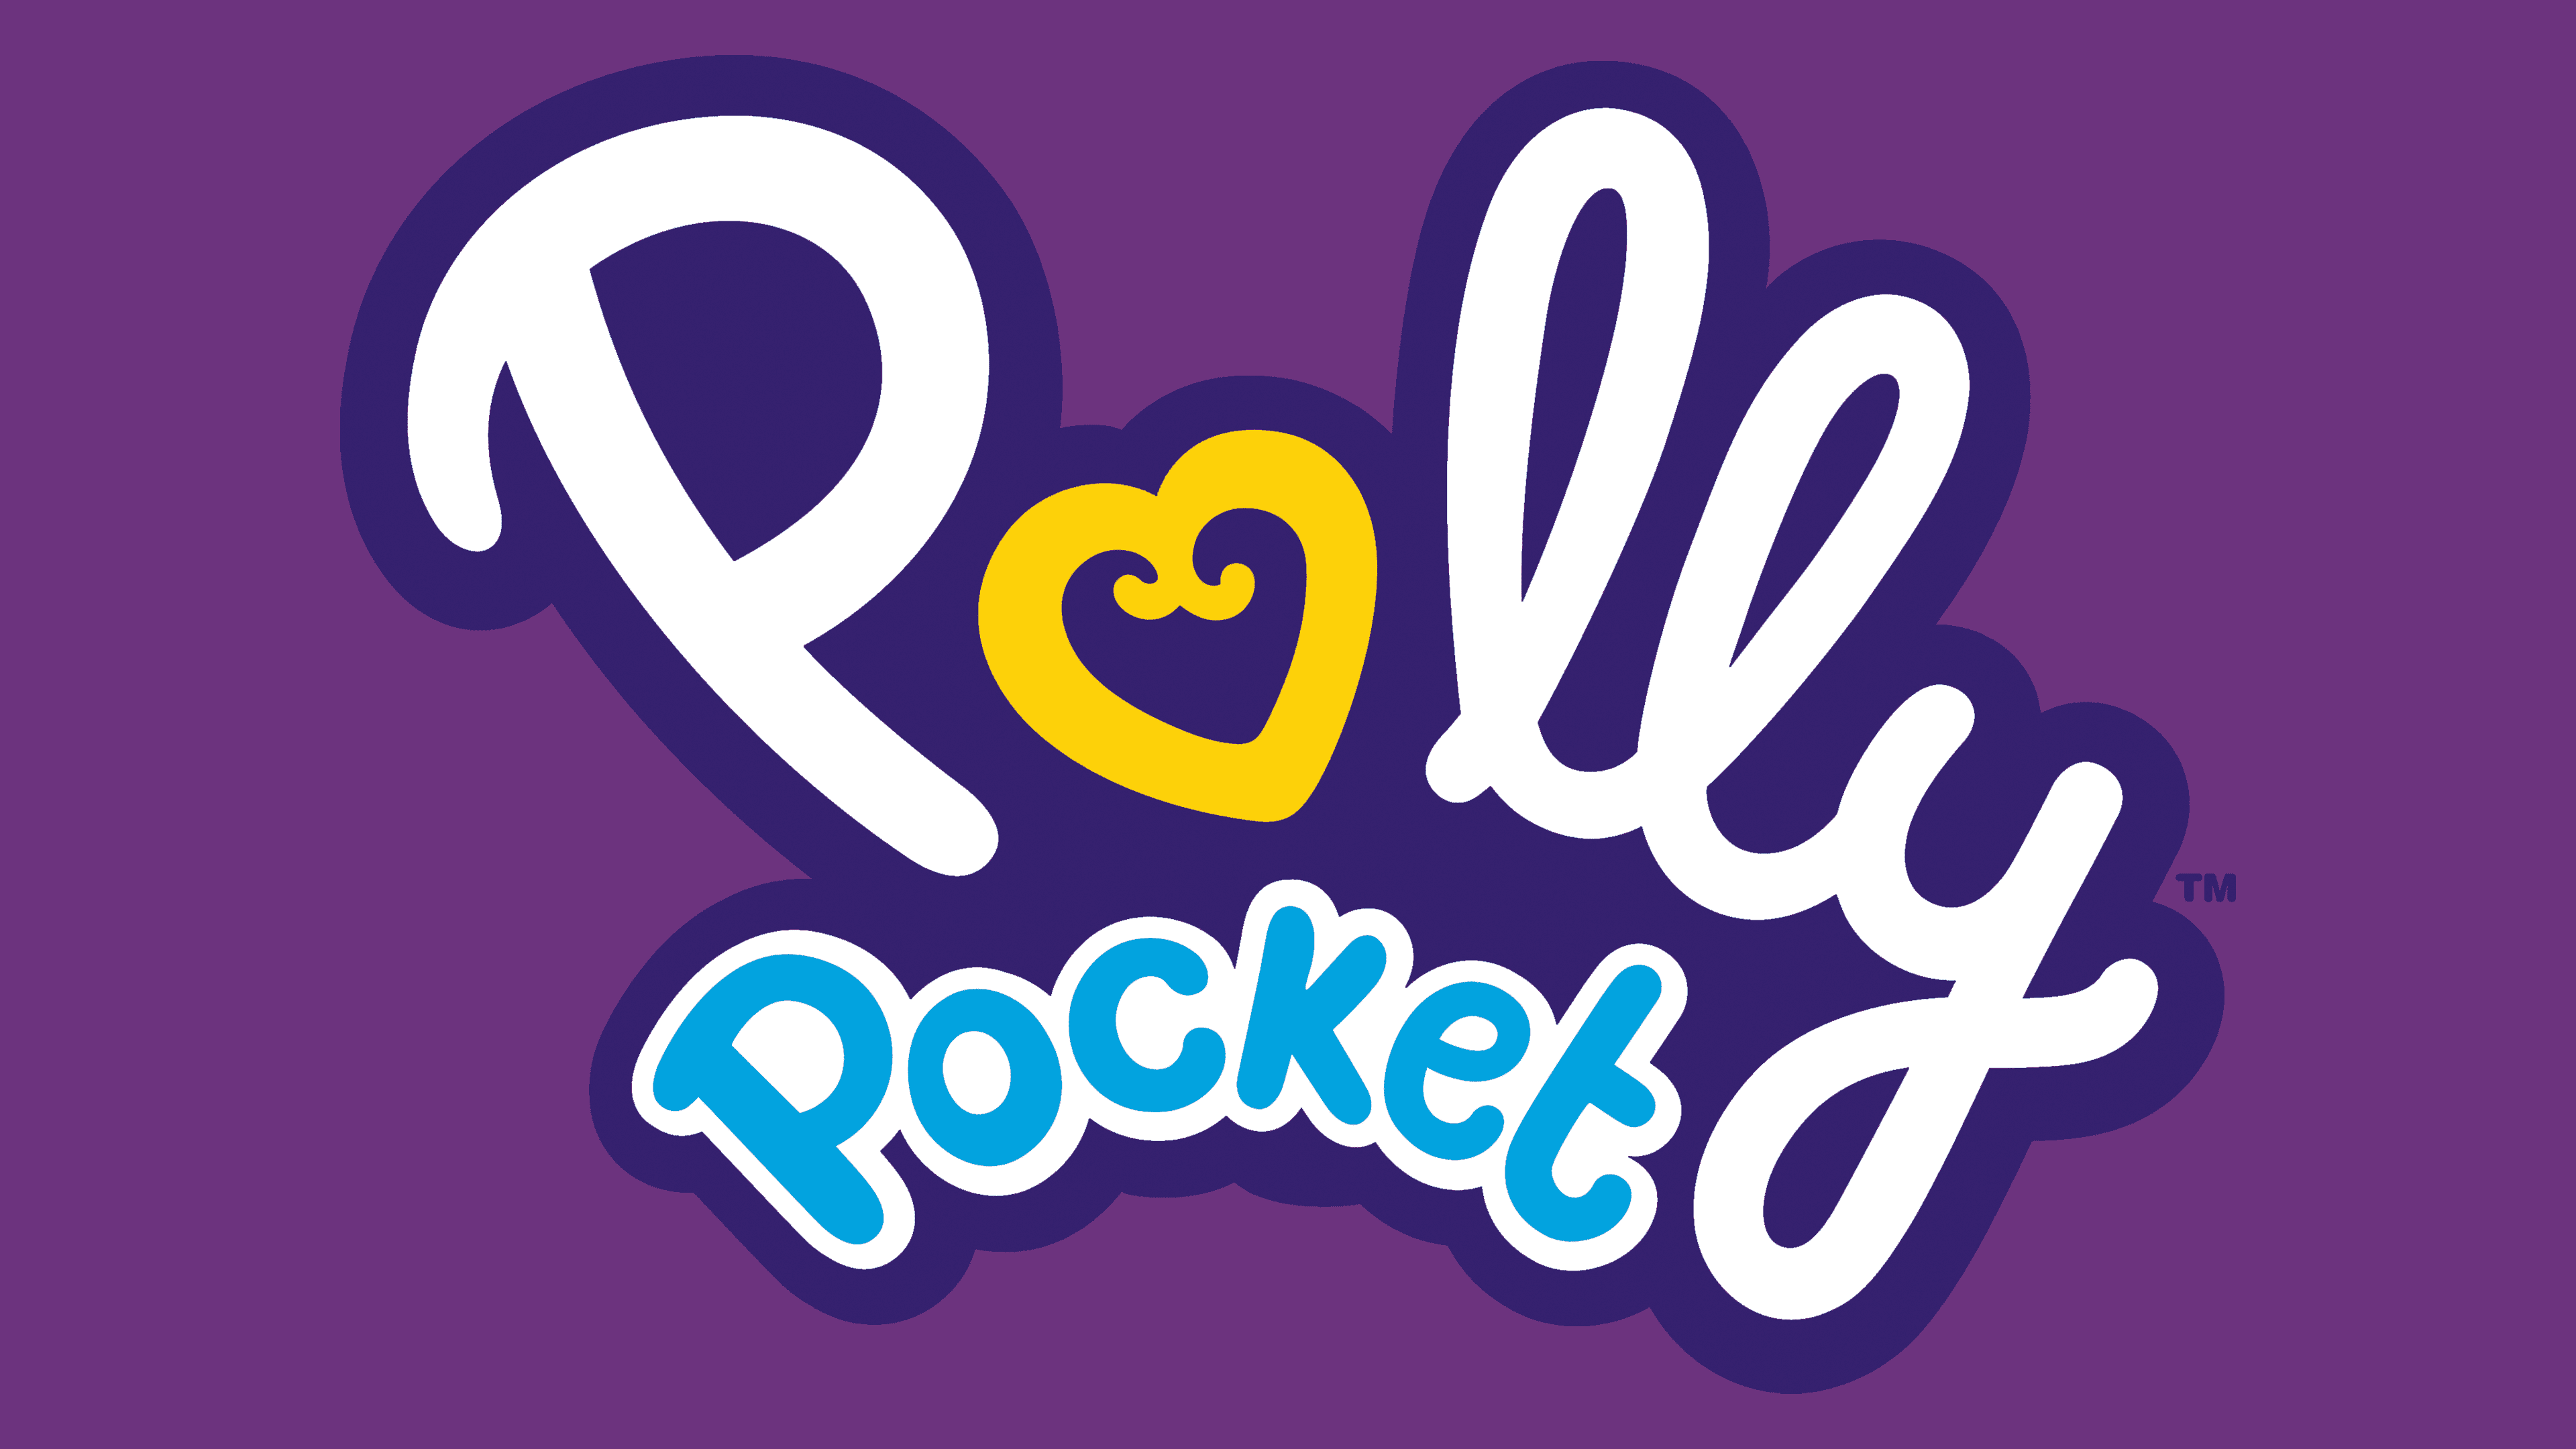 Polly Pocket Logo, symbol, meaning, history, PNG, brand